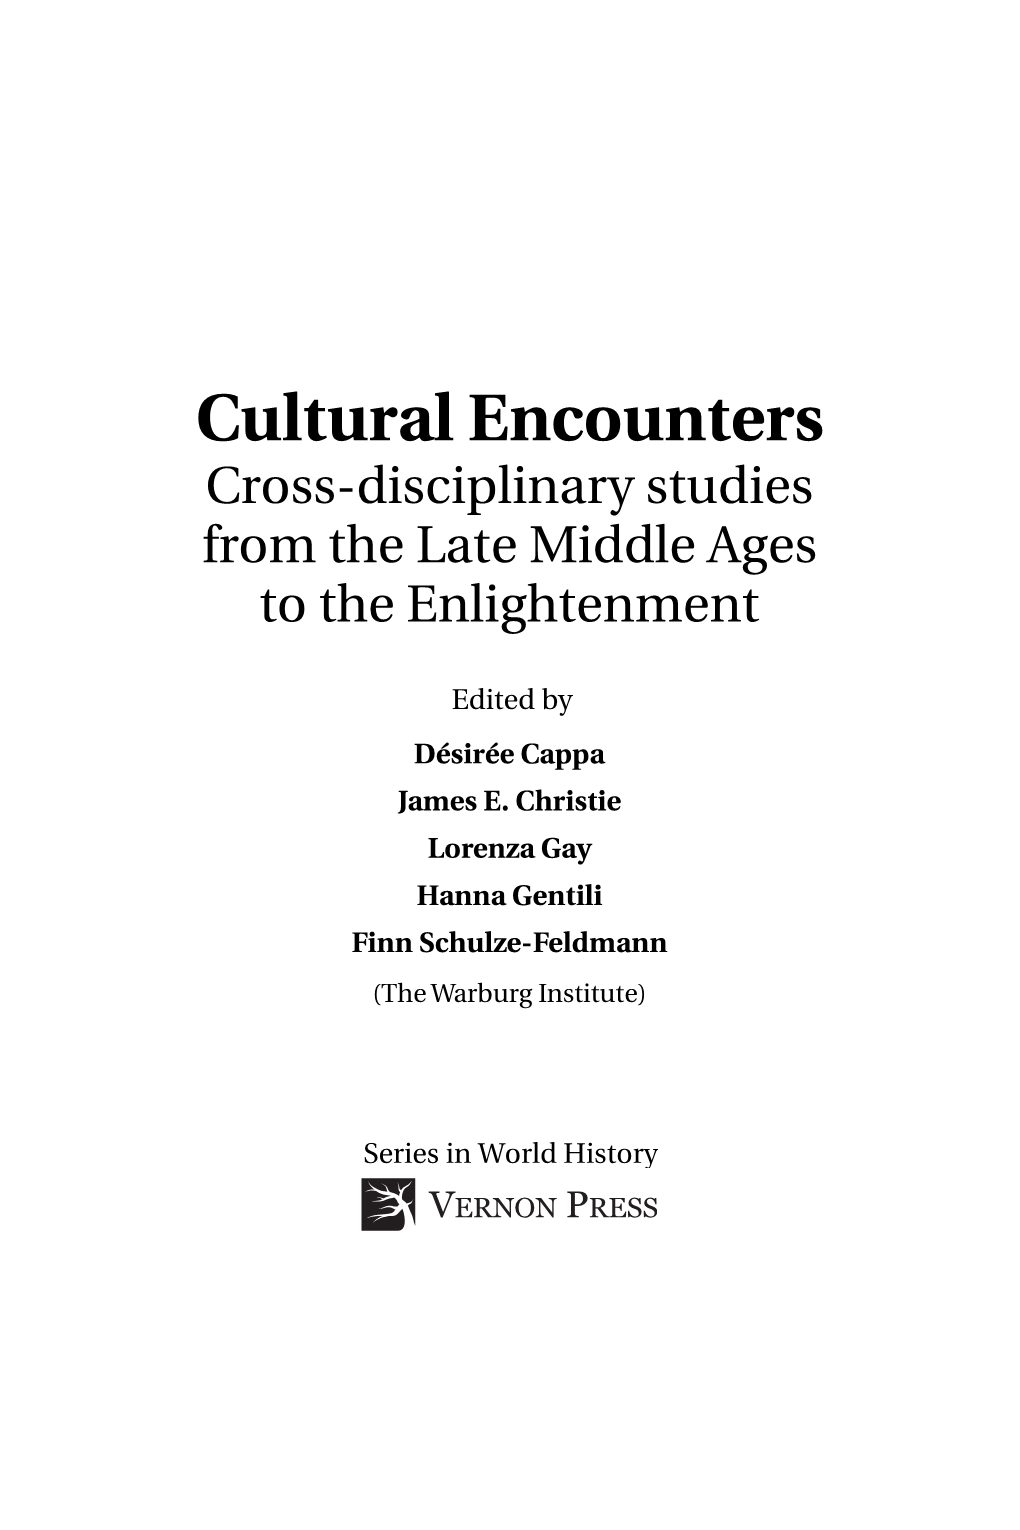 Cultural Encounters Cross-Disciplinary Studies from the Late Middle Ages to the Enlightenment